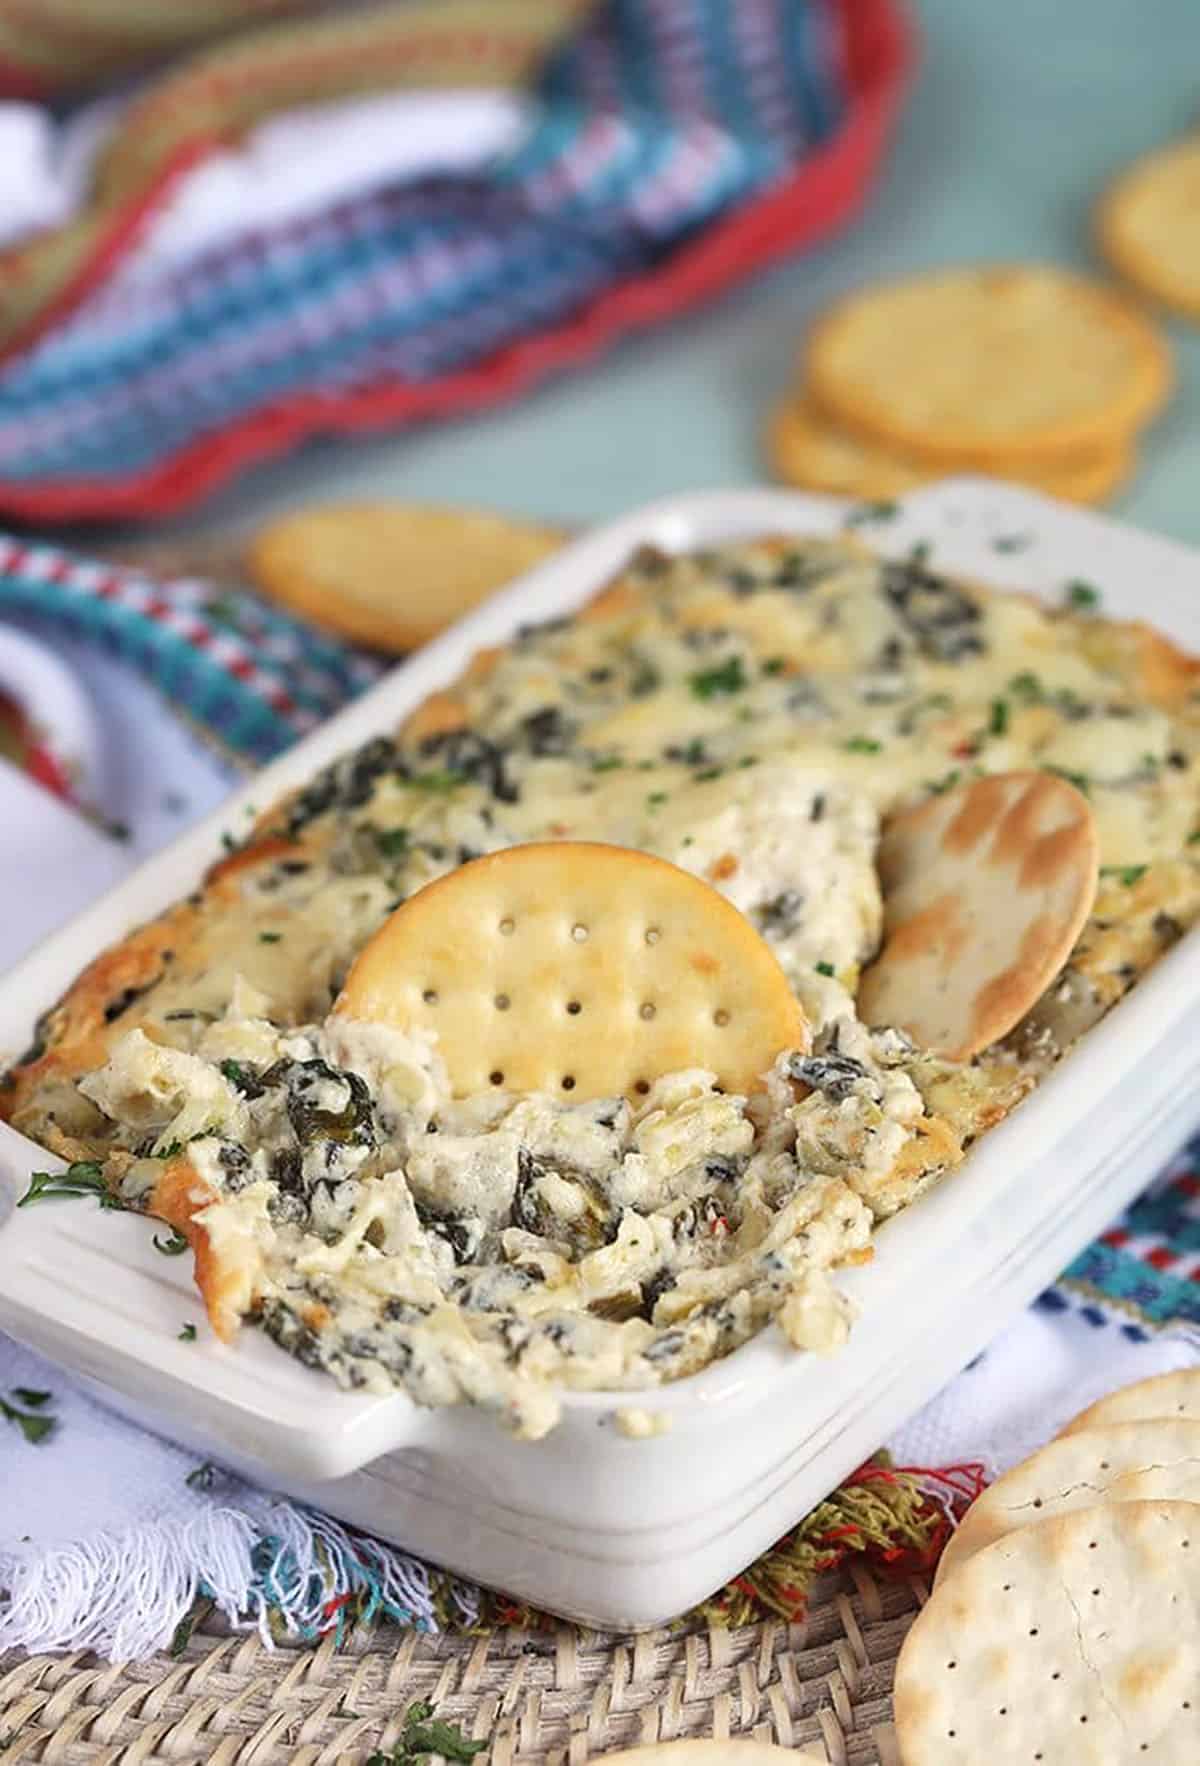 spinach artichoke dip in a white baking dish with a cracker dipped into it.